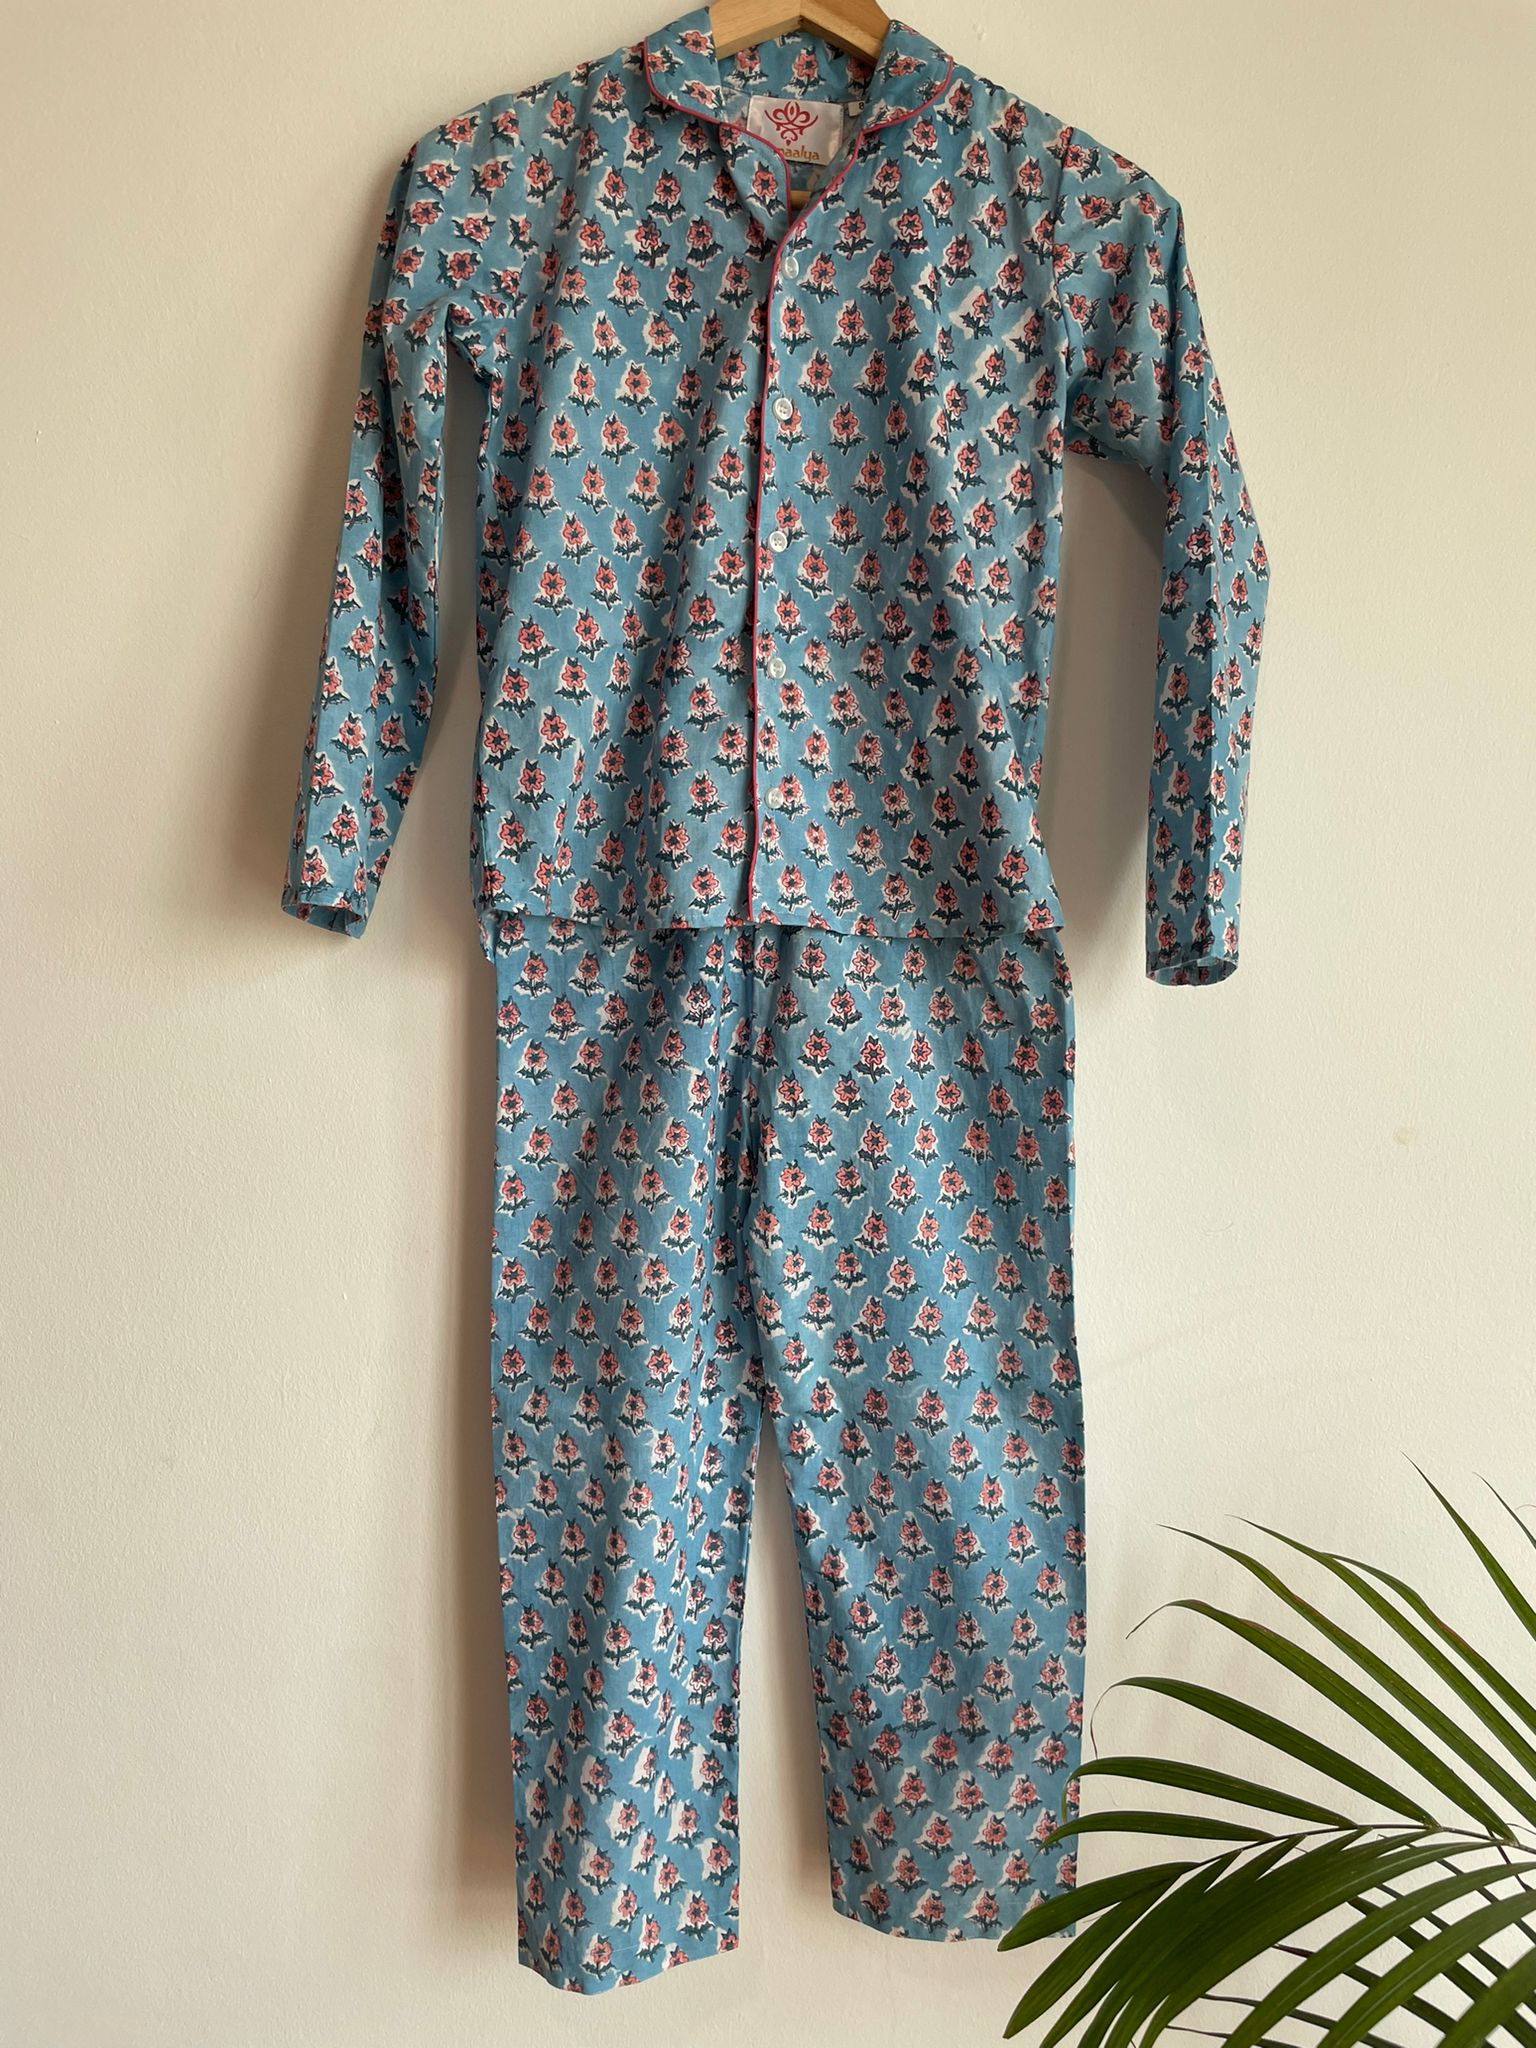 full sleeves and collar pure cotton kids night suit for boys and girls in blue and peach, buy now in Singapore